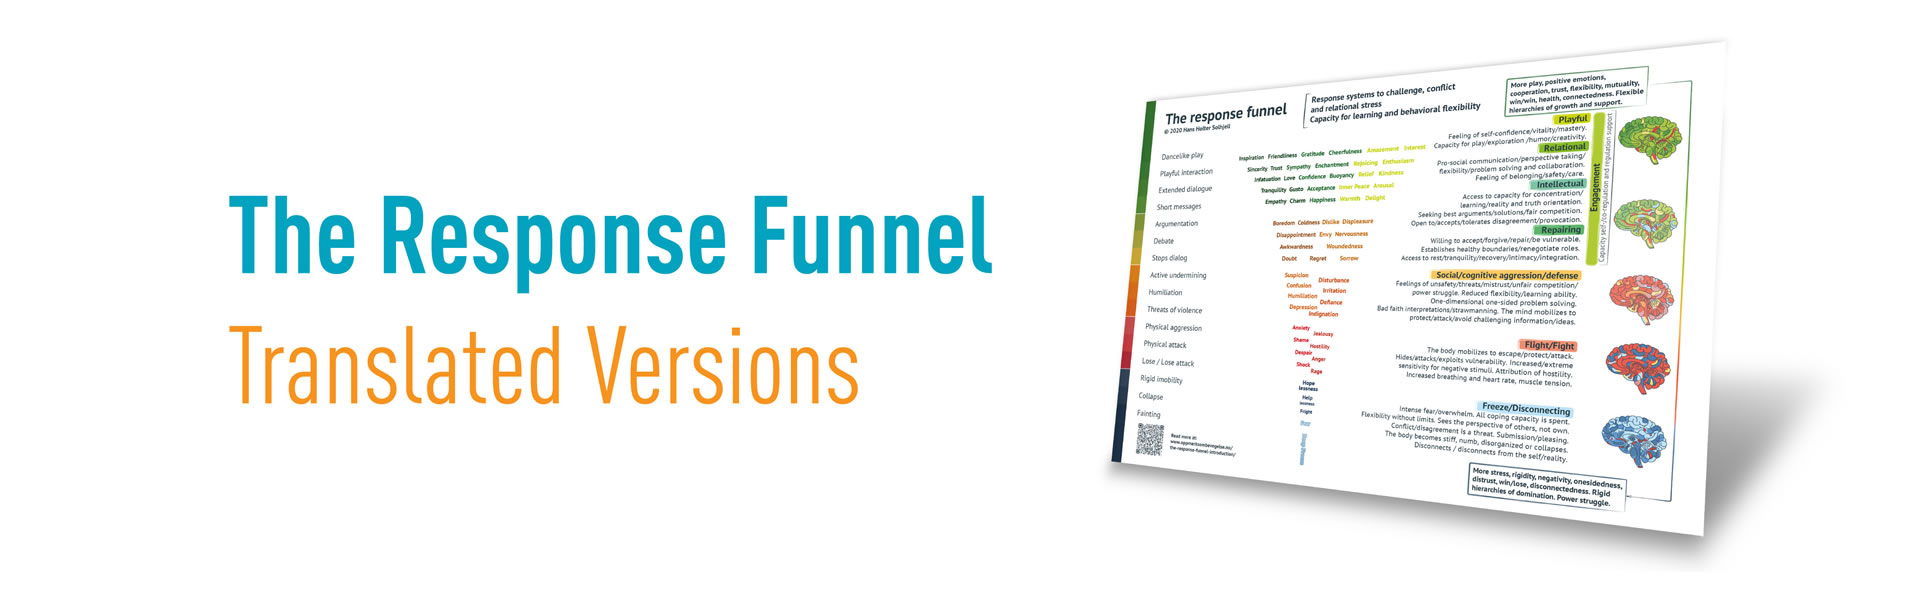 The Response Funnel Model in Different Languages